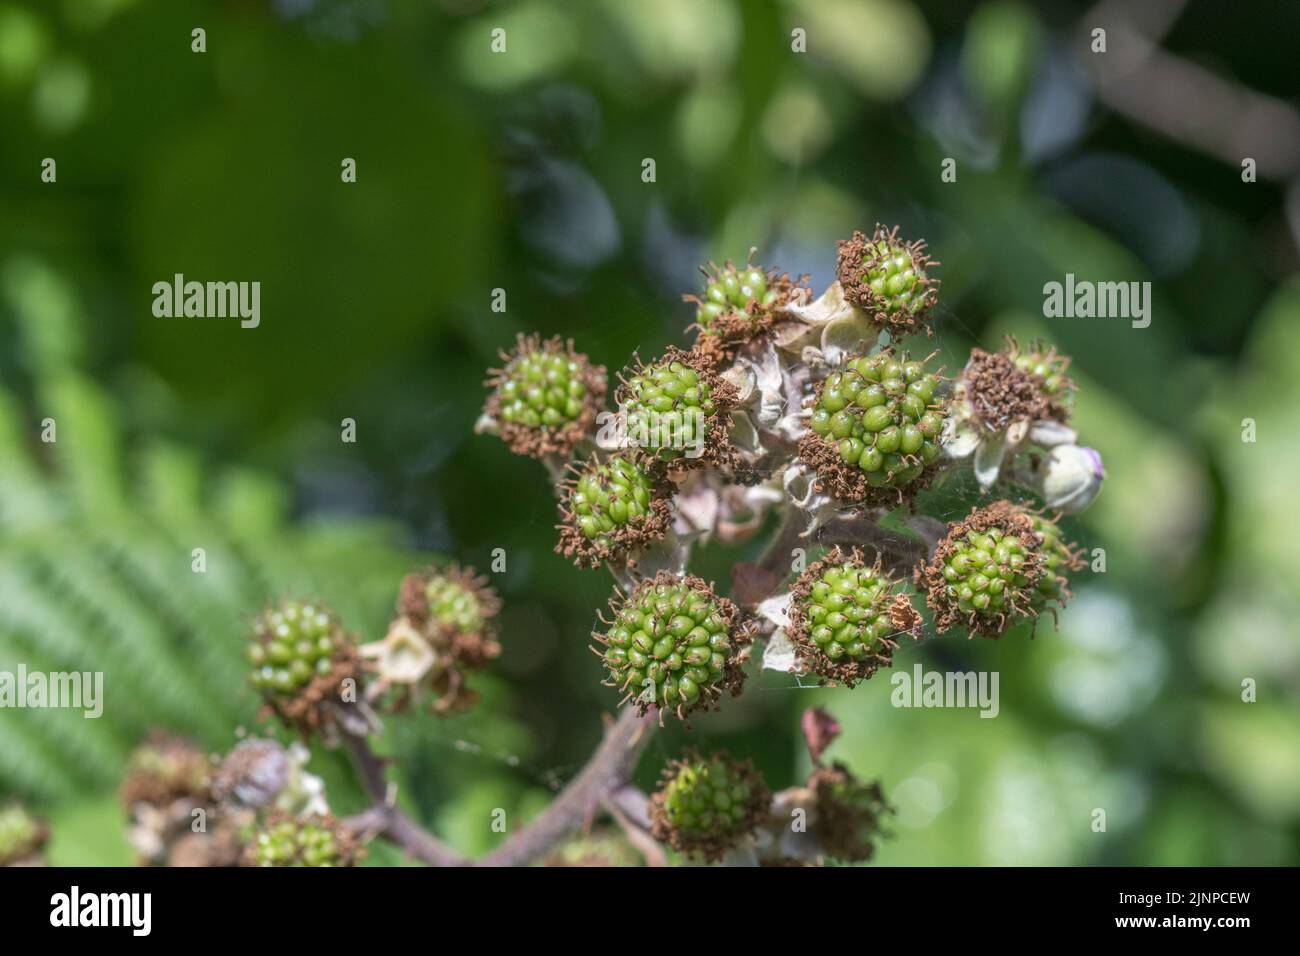 Cluster of unripe blackberries of Bramble / Rubus fruticosus in sunshine. Blackberries were formerly used in medicinal remedies - as well as a fruit. Stock Photo